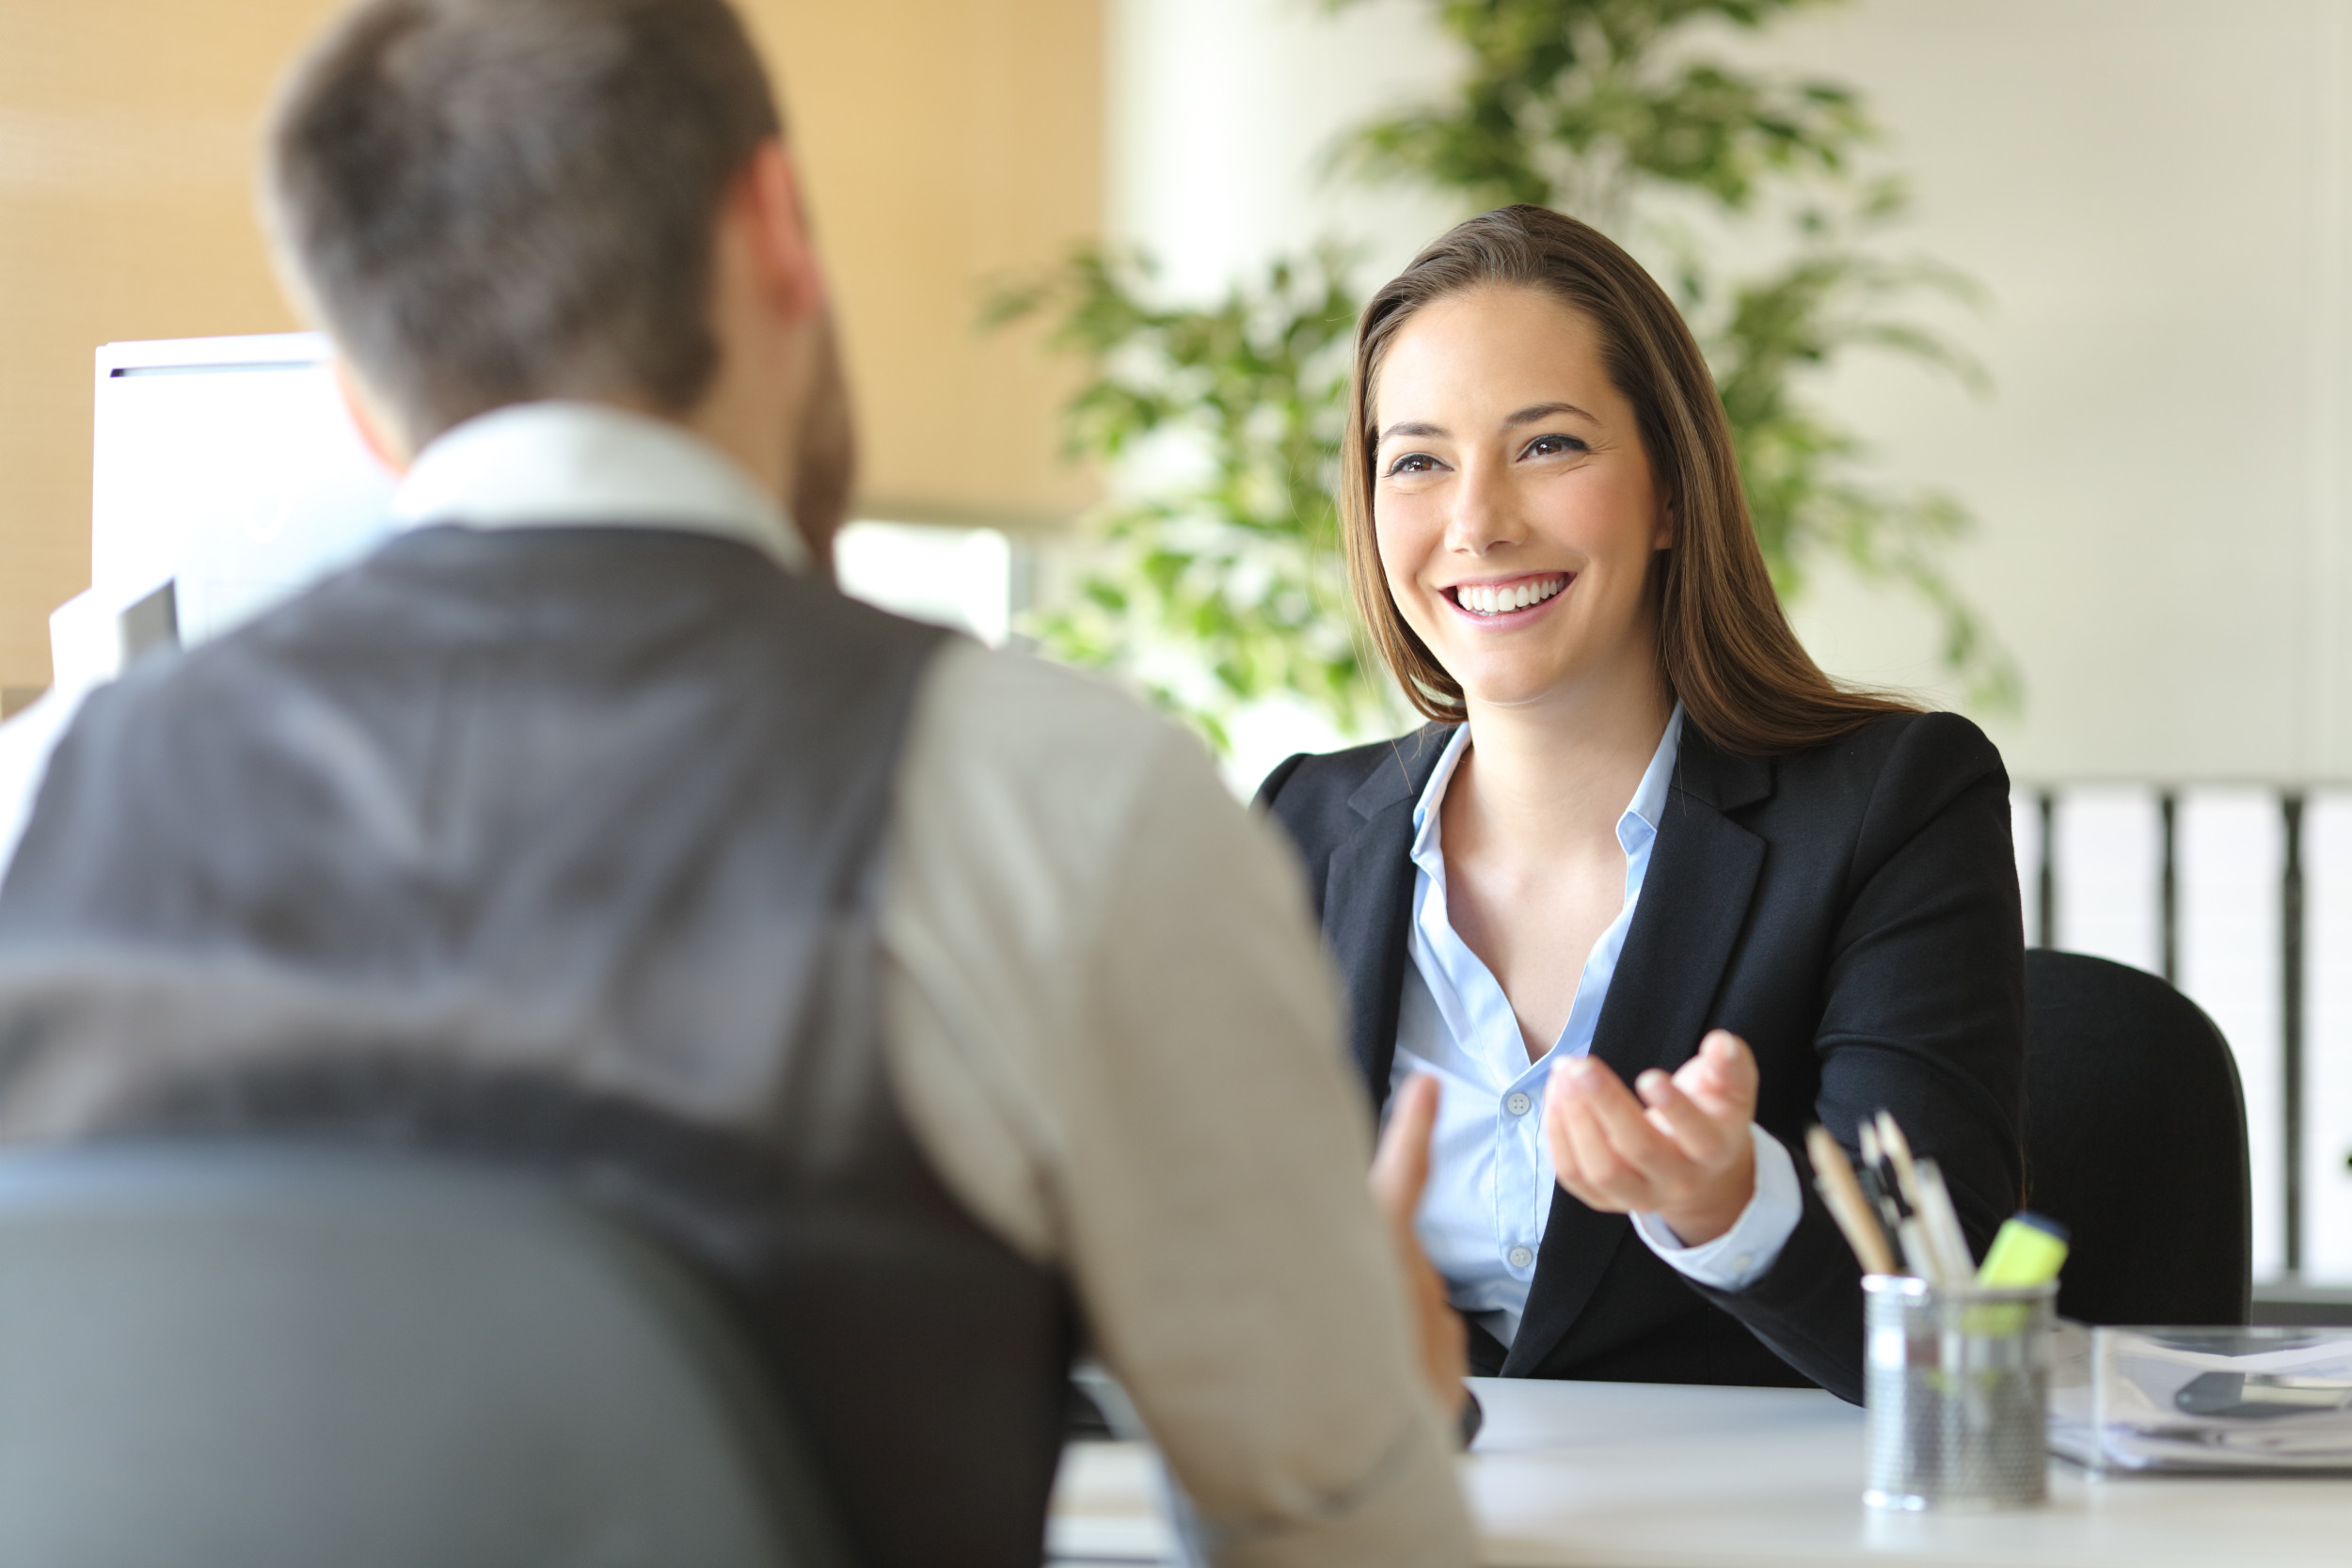 A stock image of a woman smiling while speaking to a man at a desk. "The most common reason it can be difficult to ask directly for a promotion is that it’s simply awkward to discuss money with your boss” and it can feel uncomfortable," a psychologist and business coach told Newsweek.